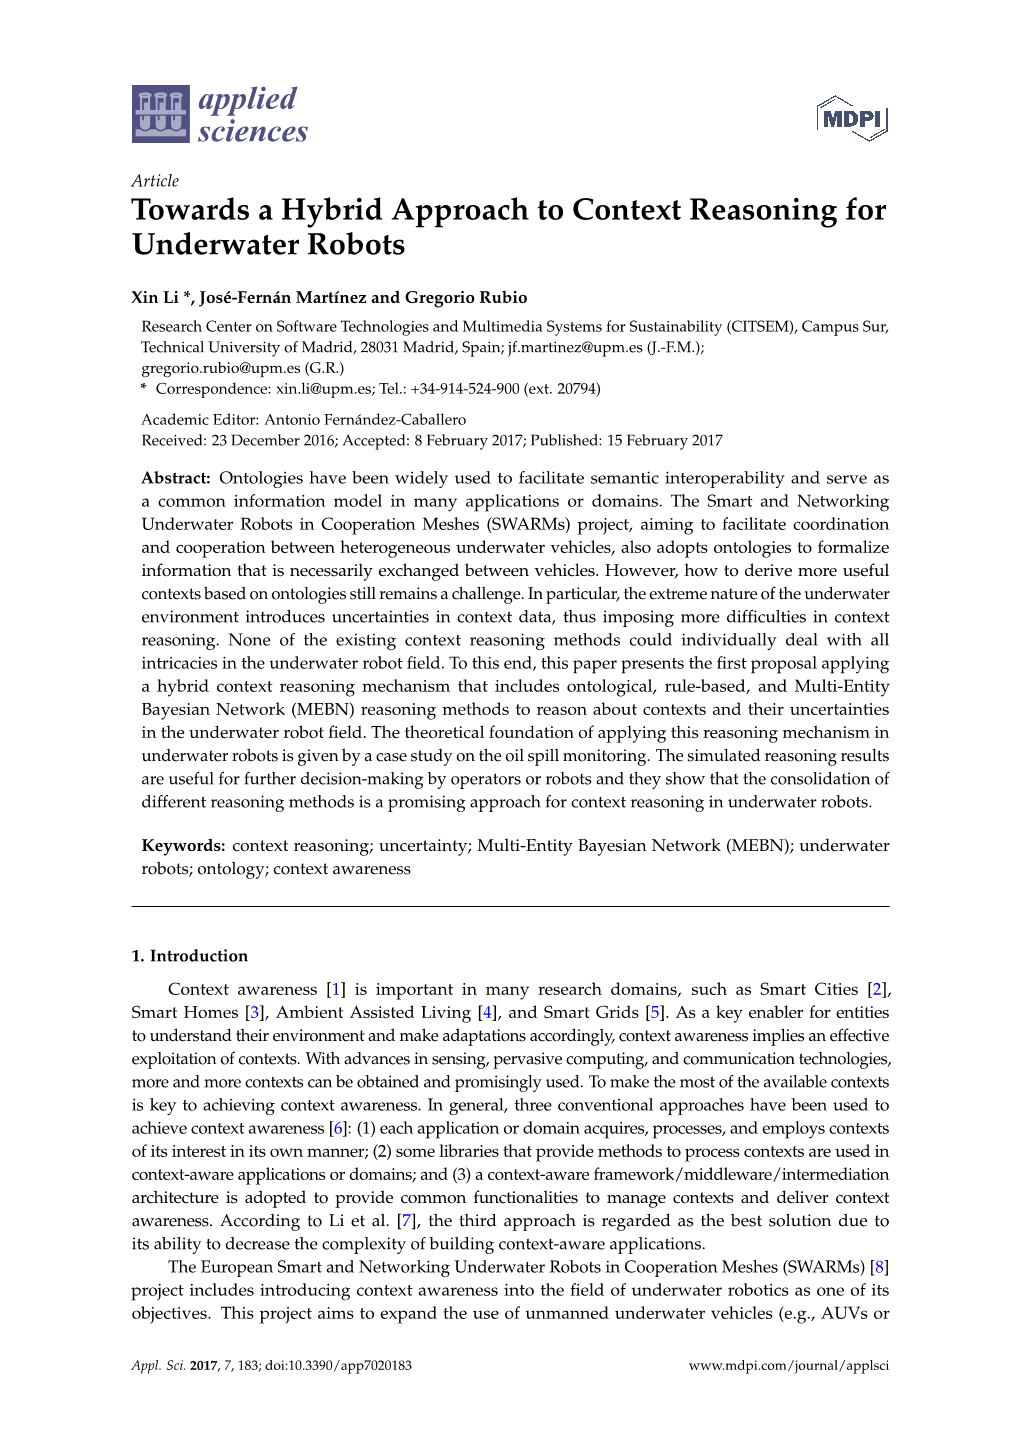 Towards a Hybrid Approach to Context Reasoning for Underwater Robots